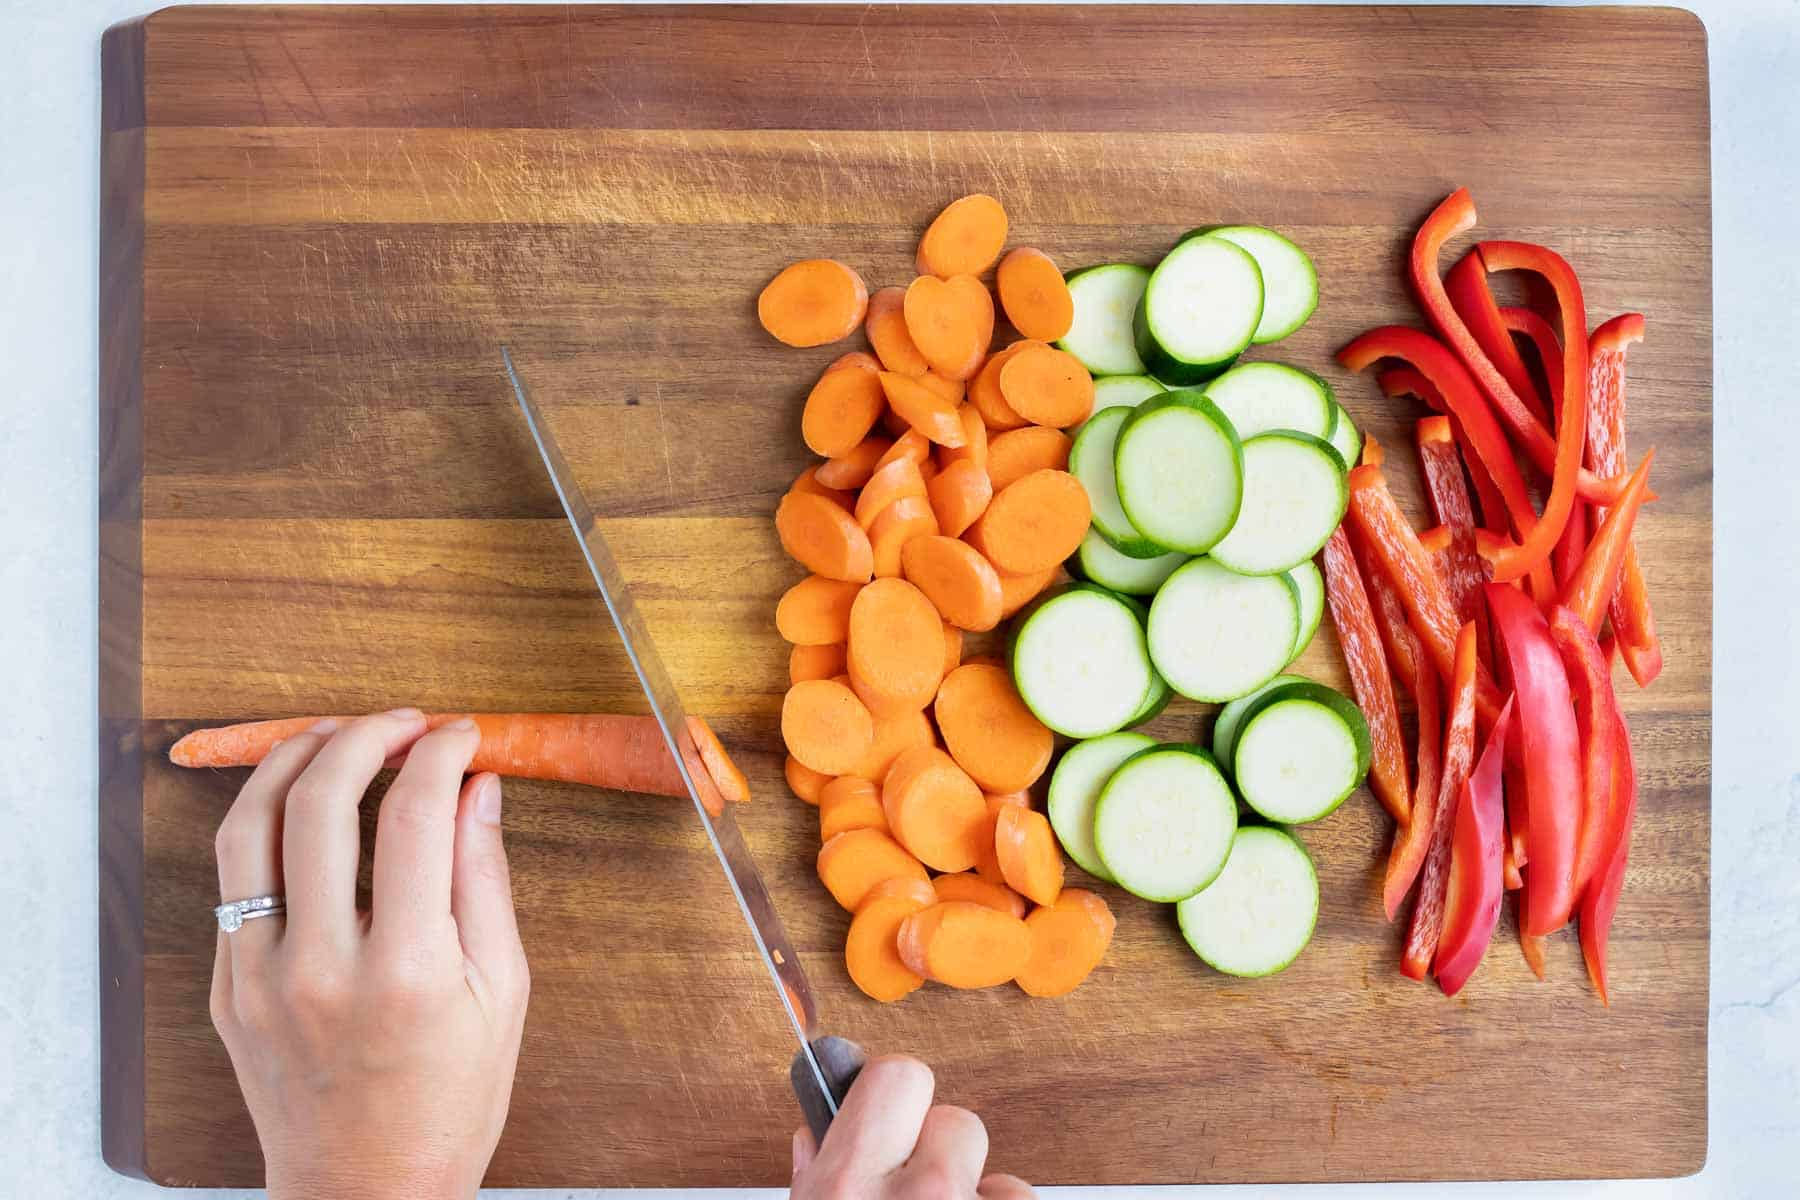 Vegetables are sliced on a cutting board.